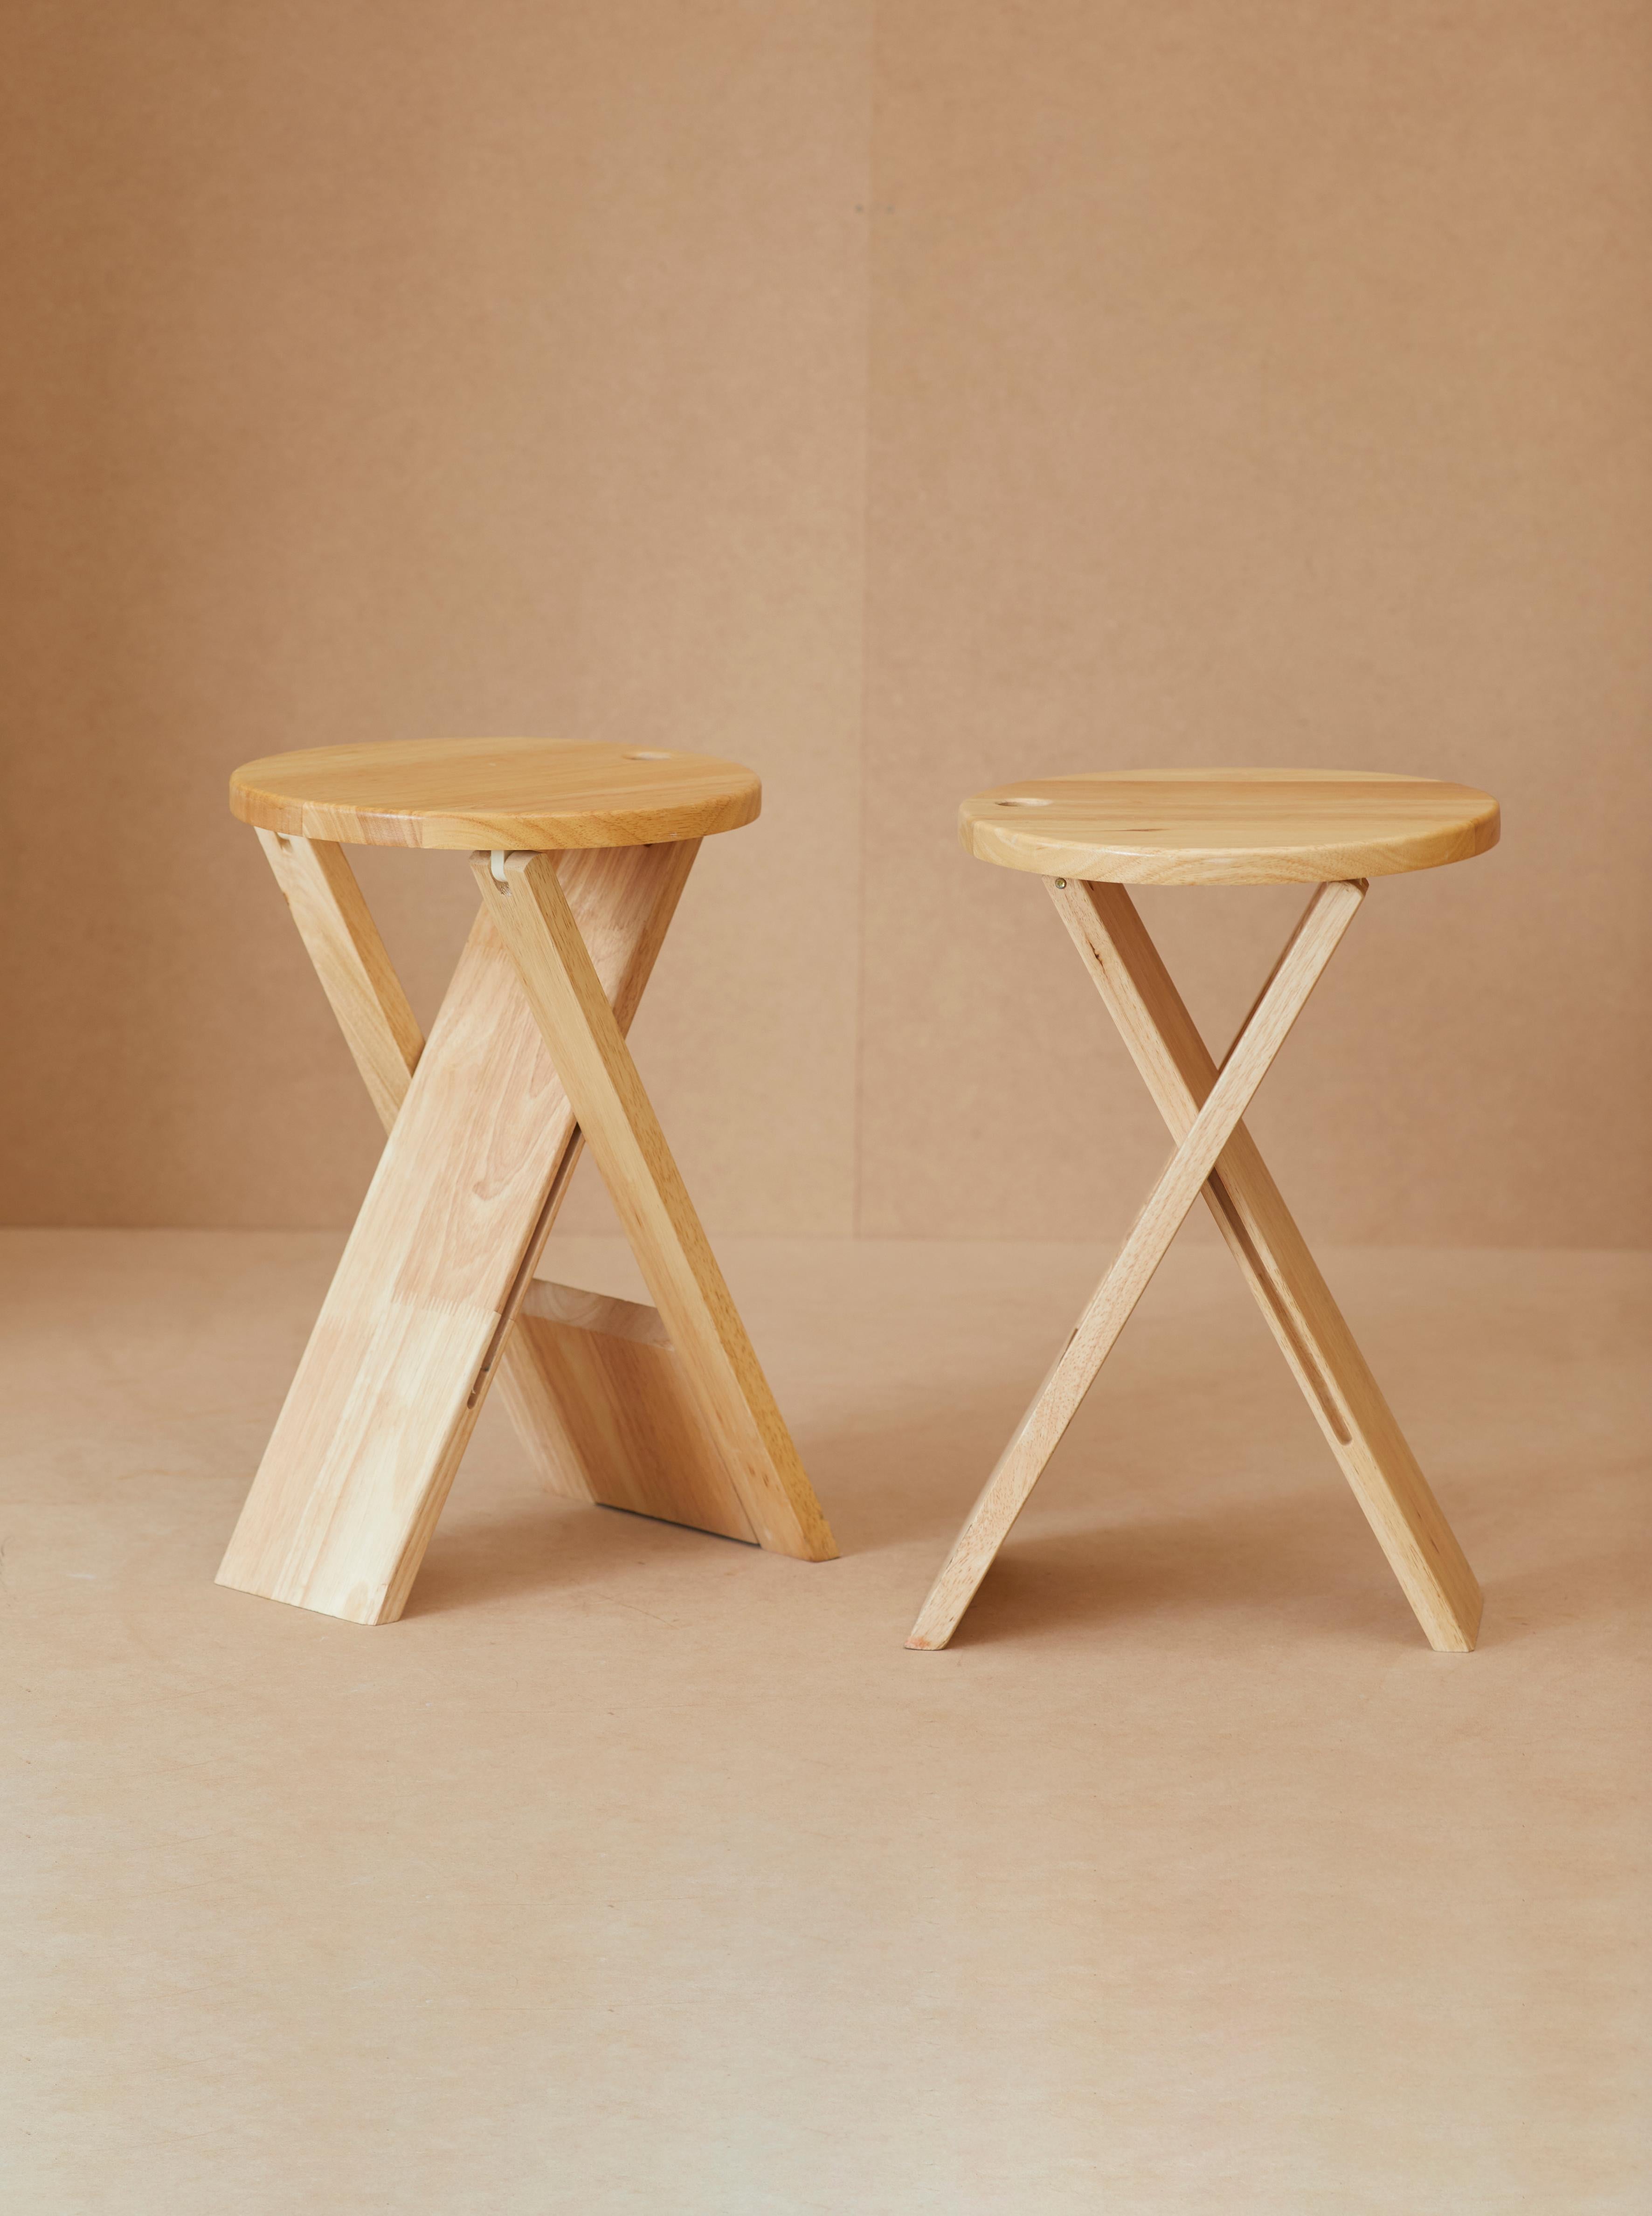 A set of 2 folding stools by Roger Tallon for Maison Sentou, France c. 1970. 

A smart and practical design in solid beech wood that can be folded and hung.  